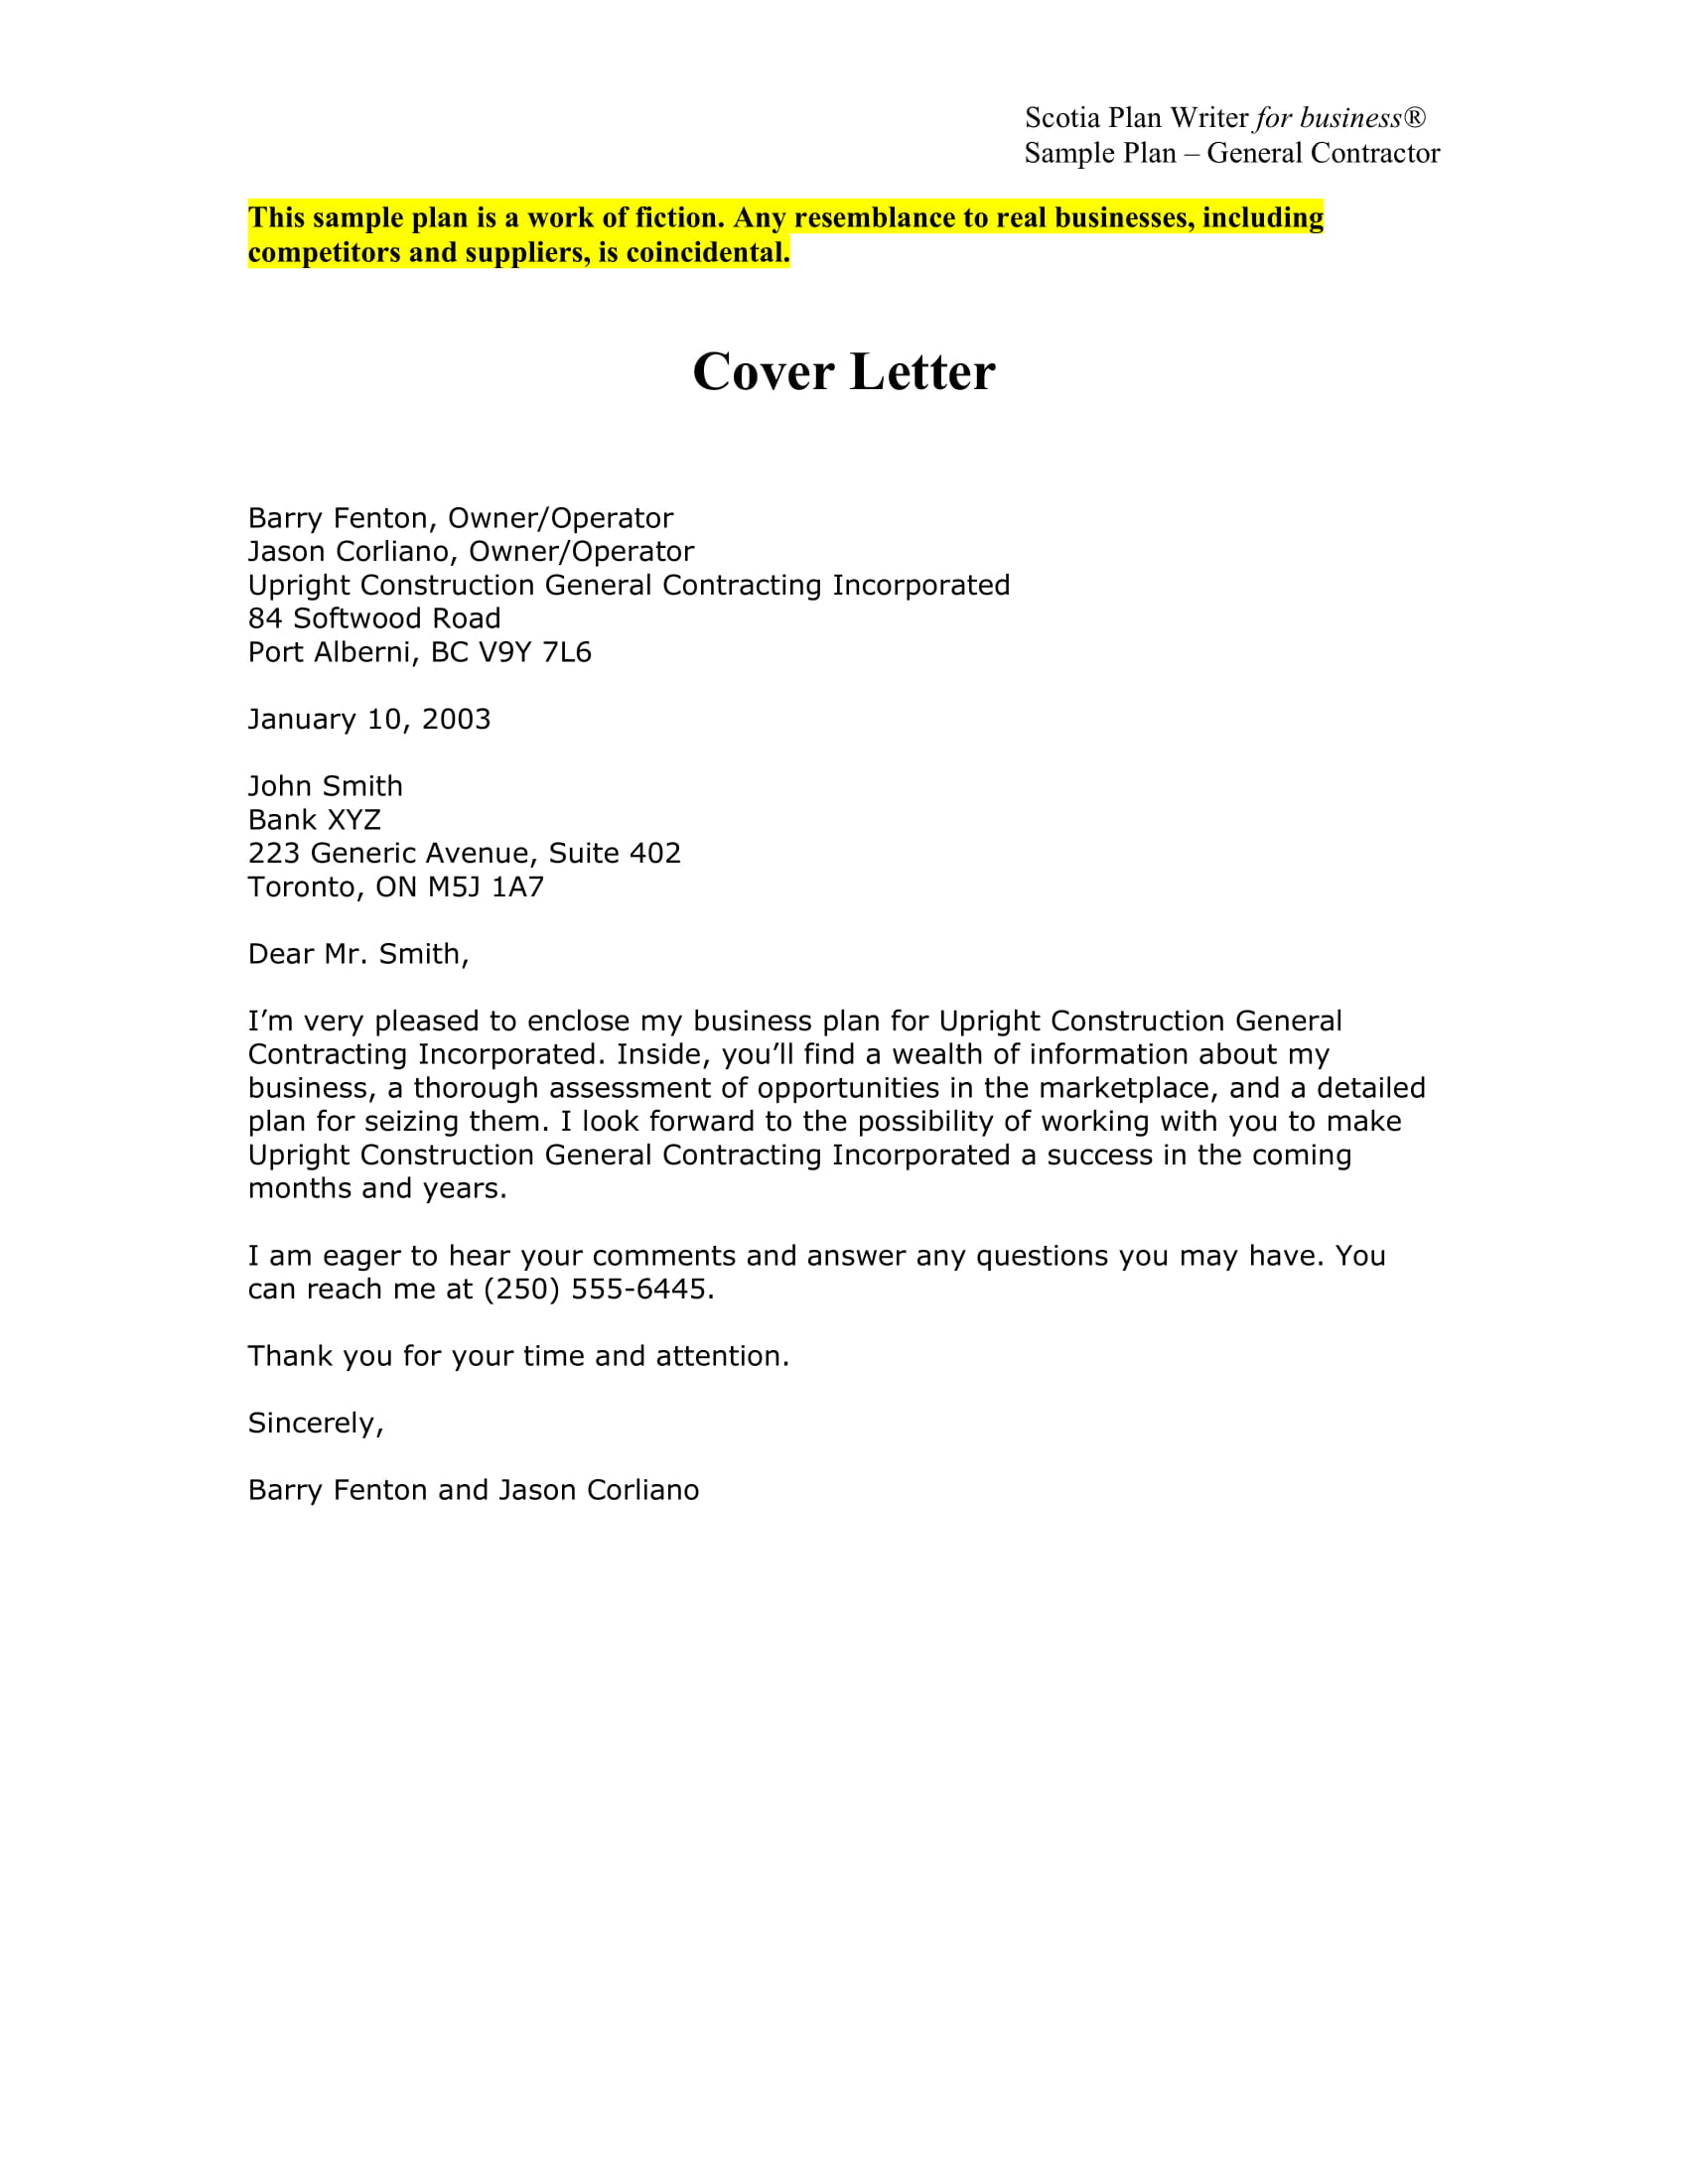 business proposal cover letter example